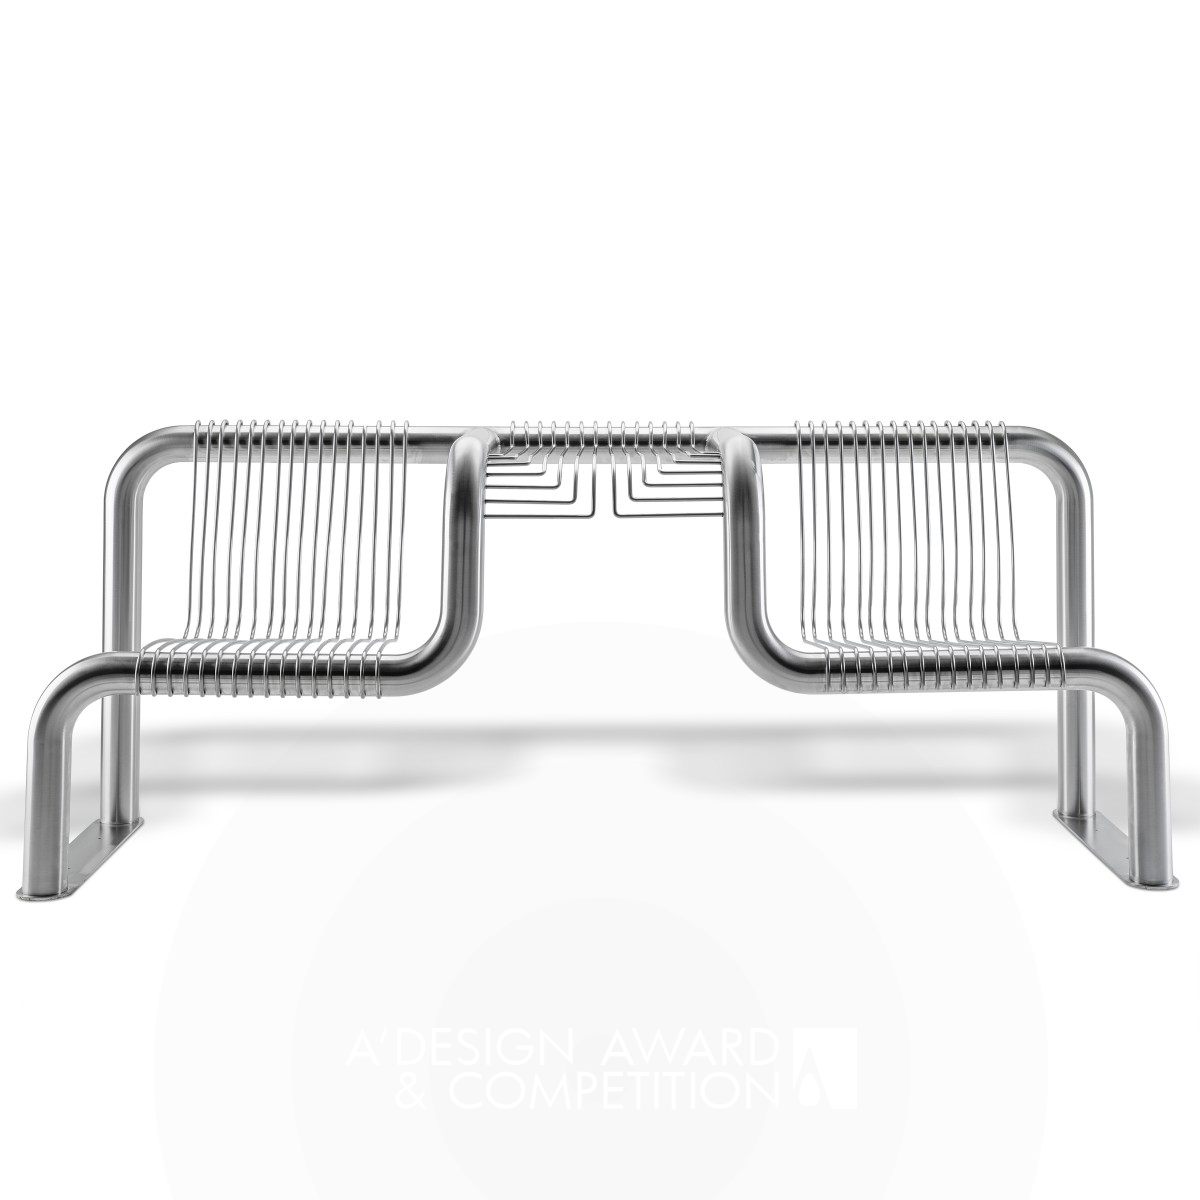 Bench for BLM Group Outdoor seating by Enrico Azzimonti